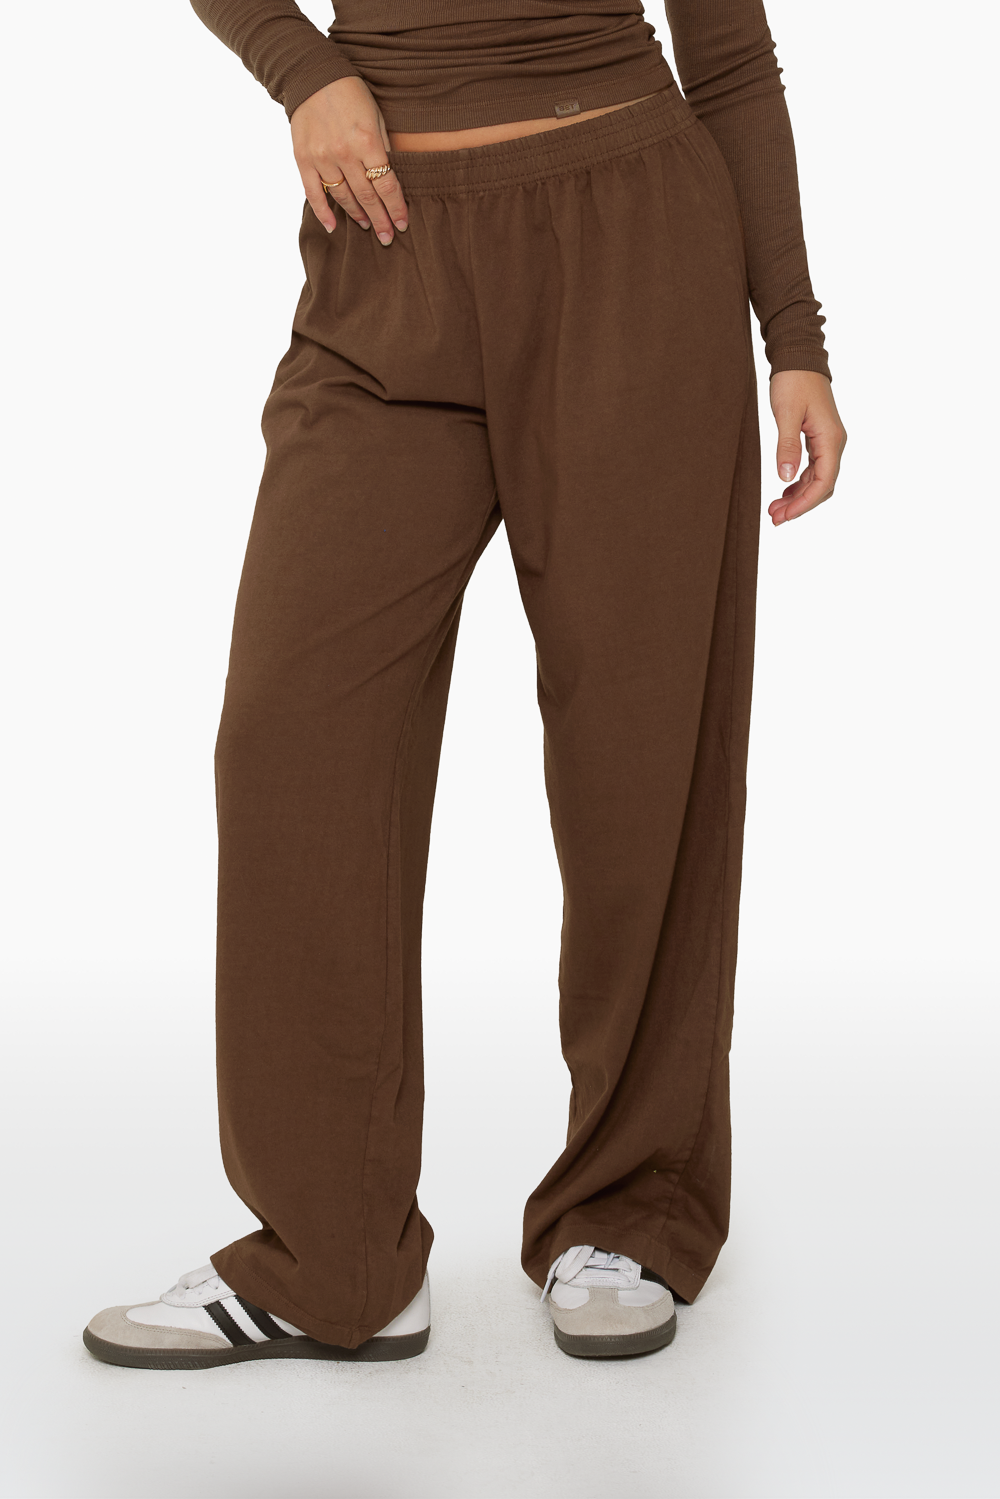 HEAVY COTTON EASY PANTS - BARK Featured Image